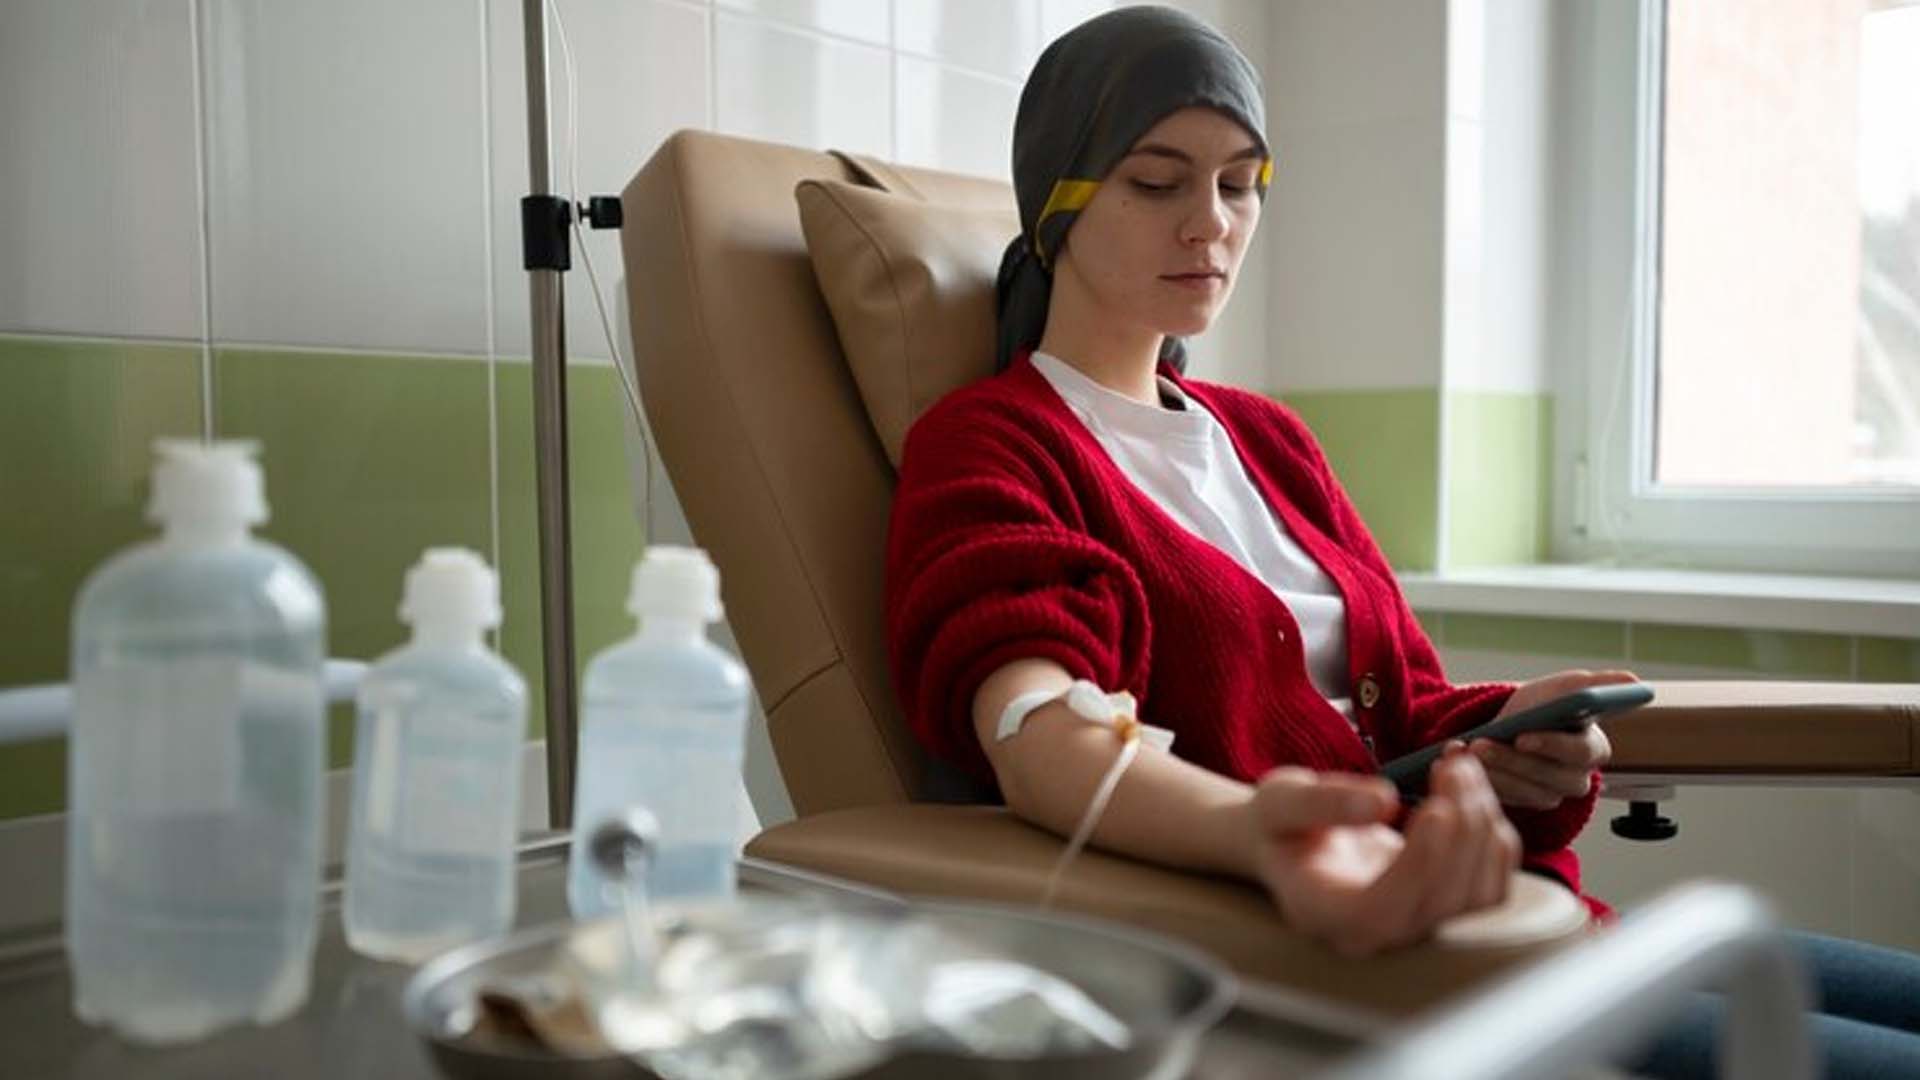 Women Getting chemotherapy (chemo) Treatment in Hospital